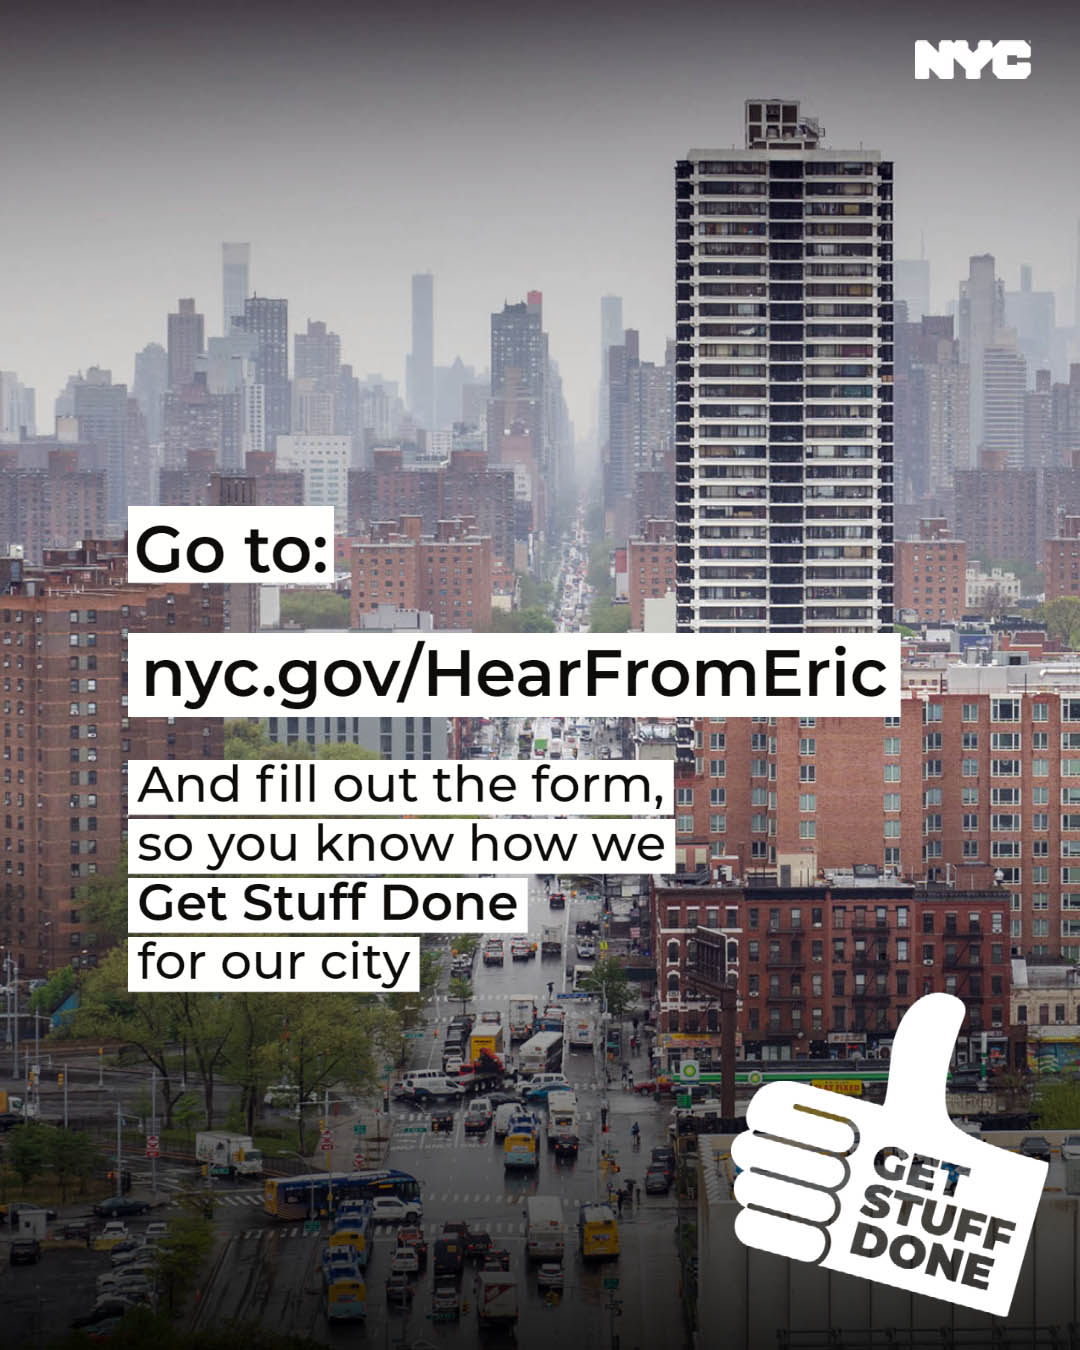 Photo of NYC with text leading to Mayor Adams' newsletter sign-up.